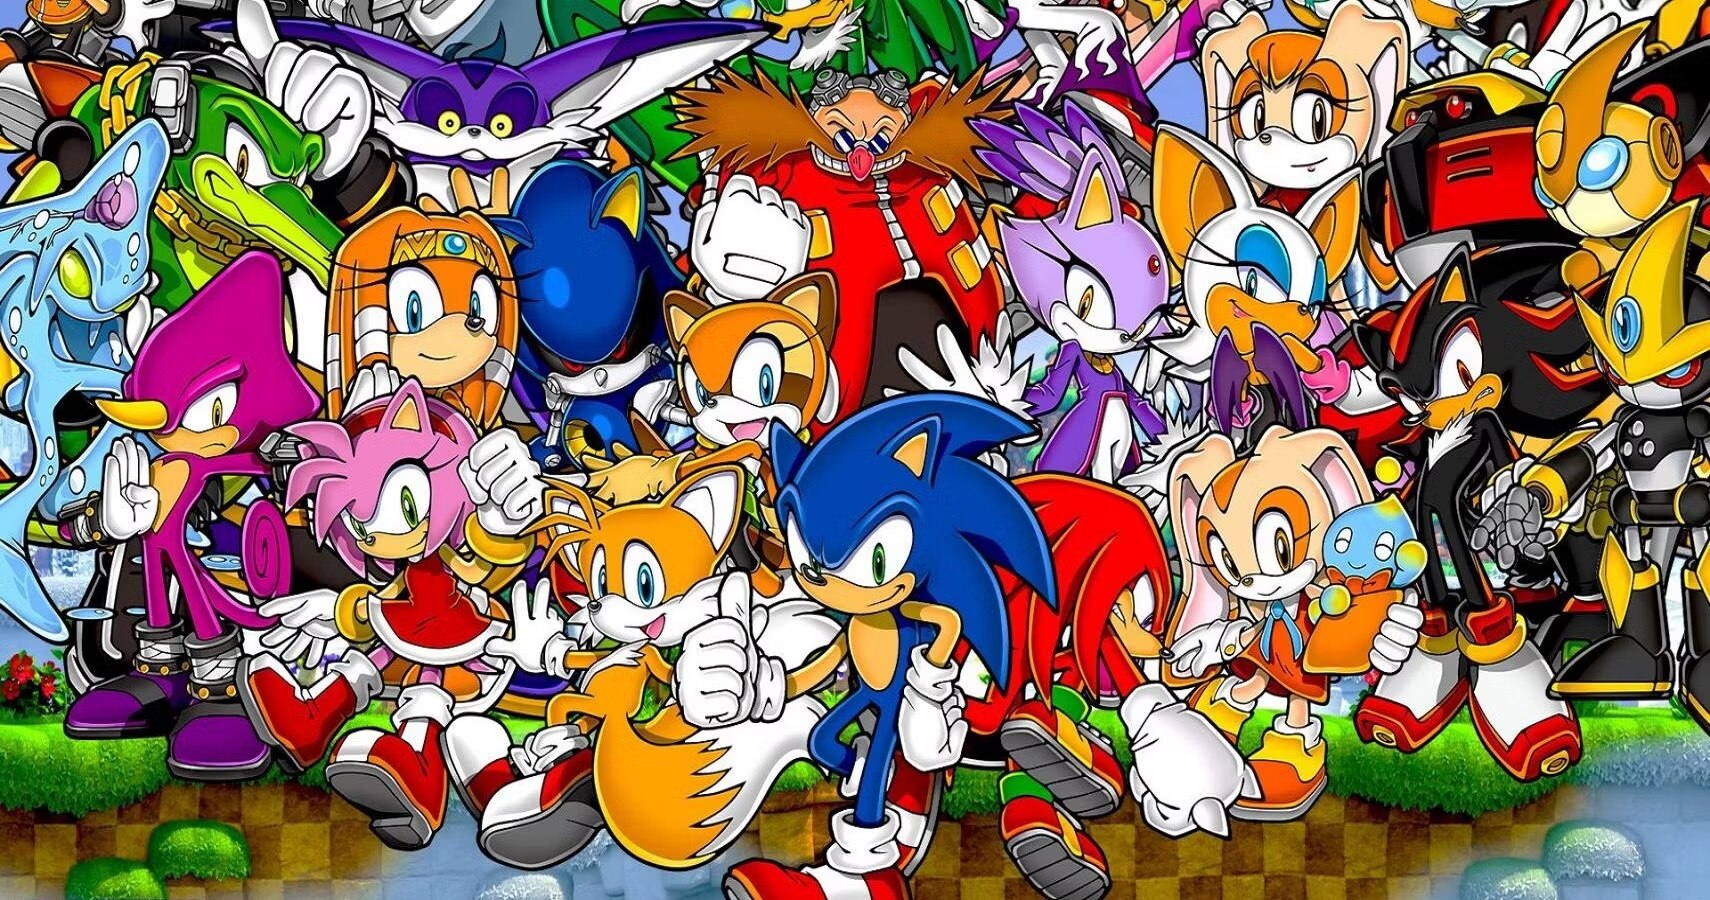 ♫ SONIC & TAILS - O MUSICAL ♫ 